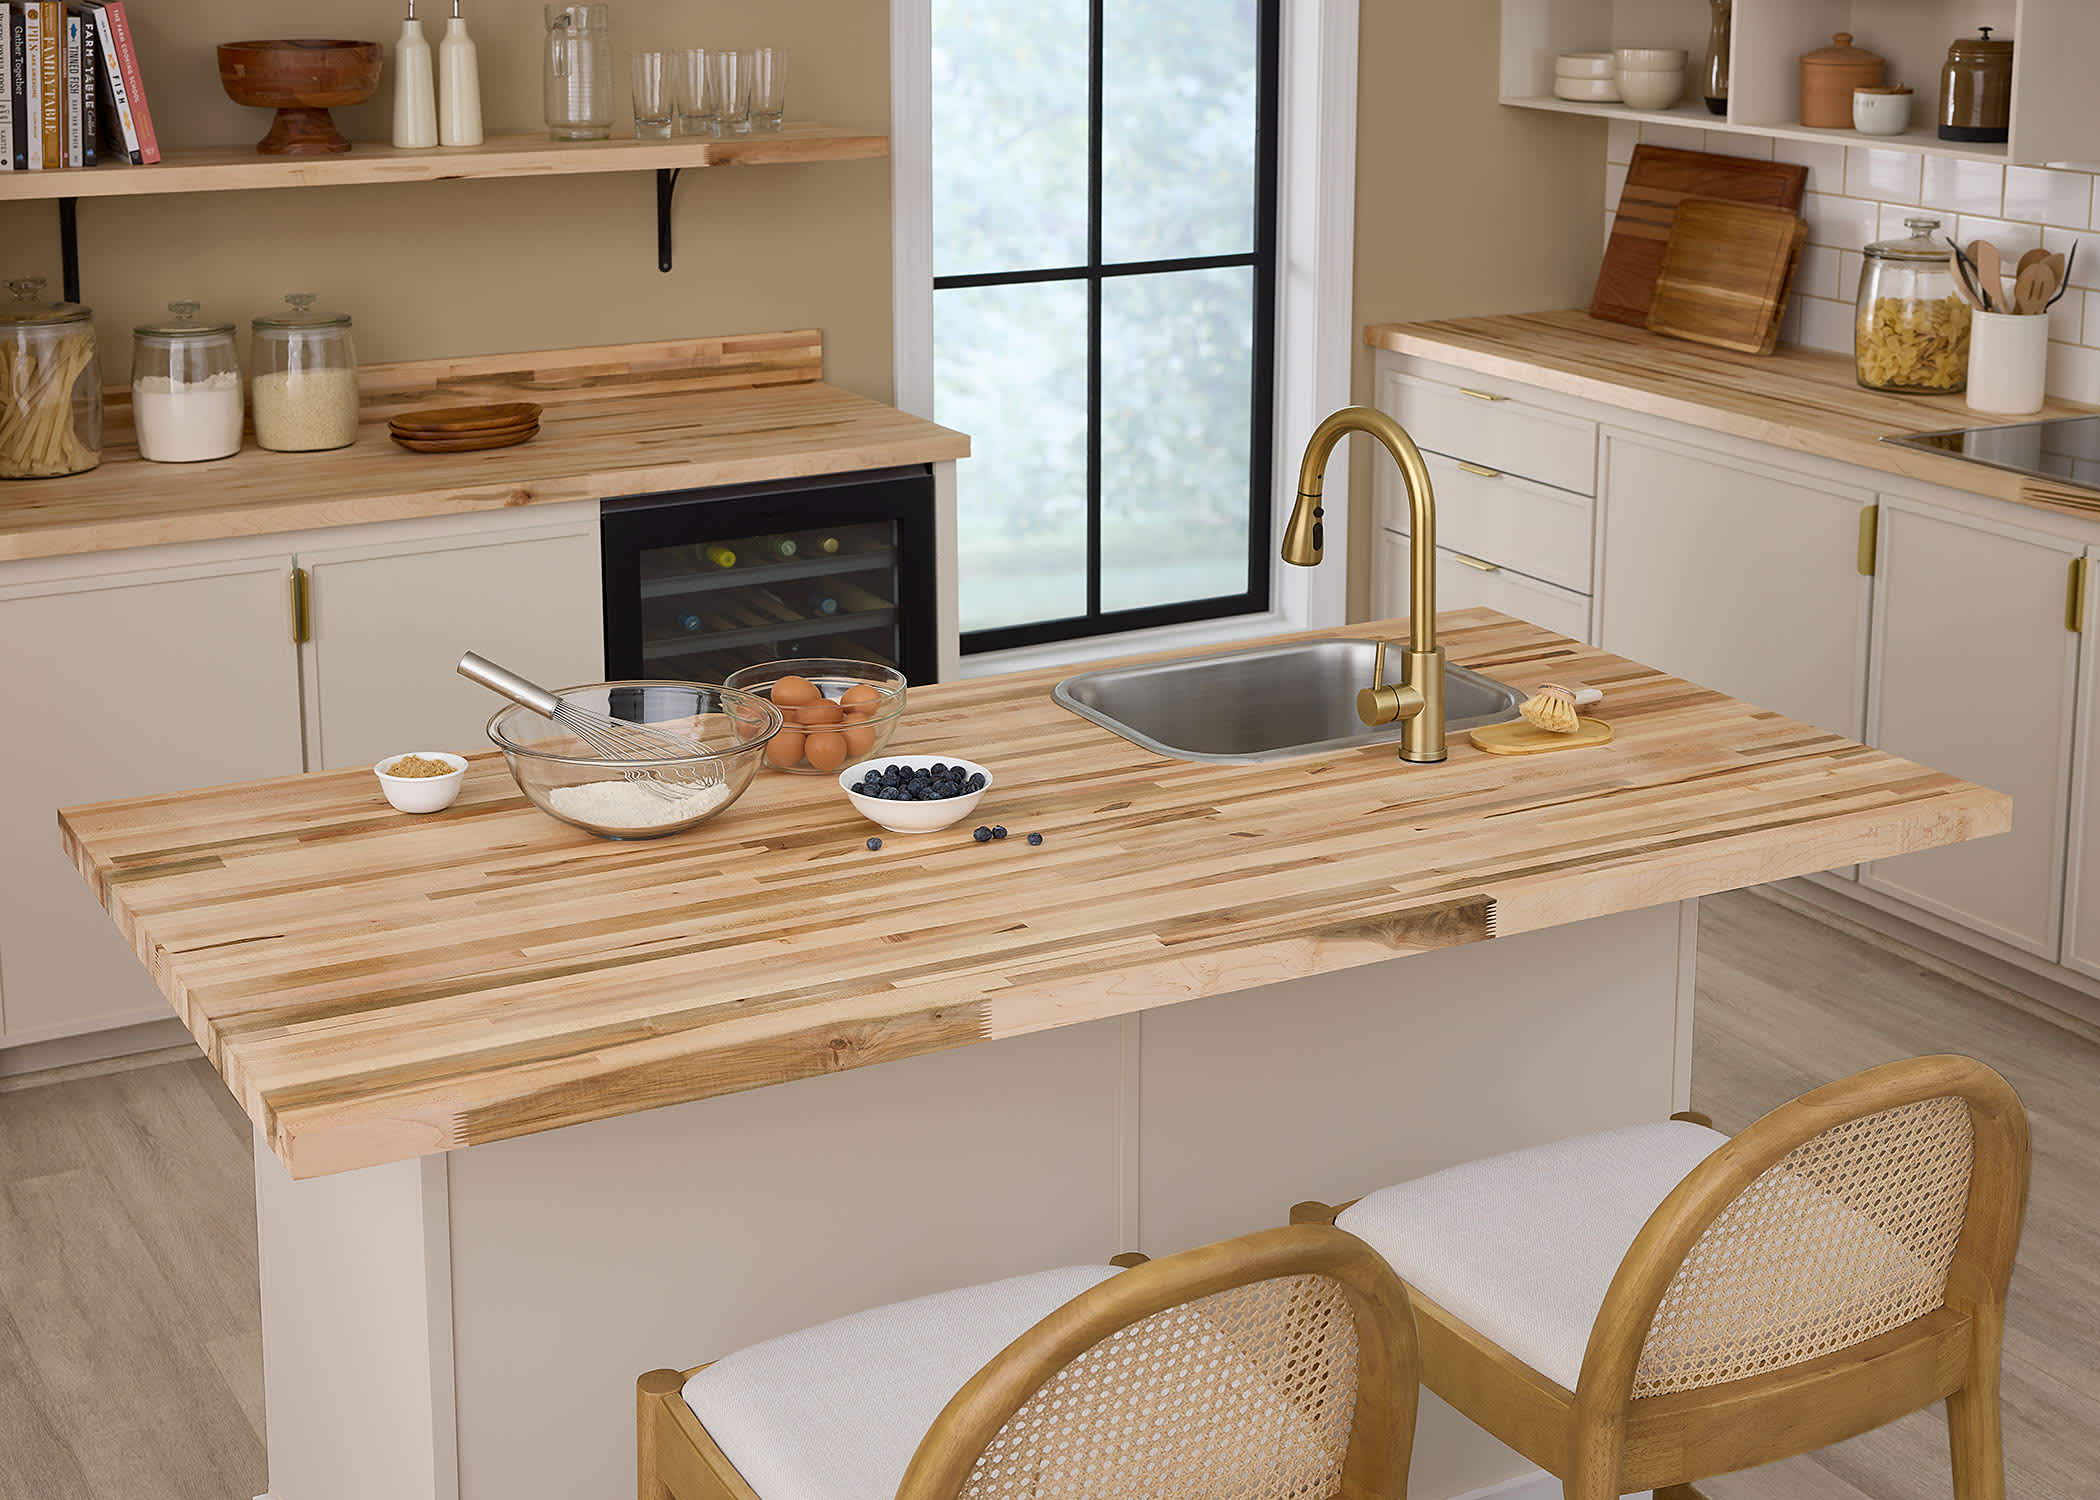 butcher block counters in kitchen with drop in sink and brass single handle faucet plus rattan armless bar stools